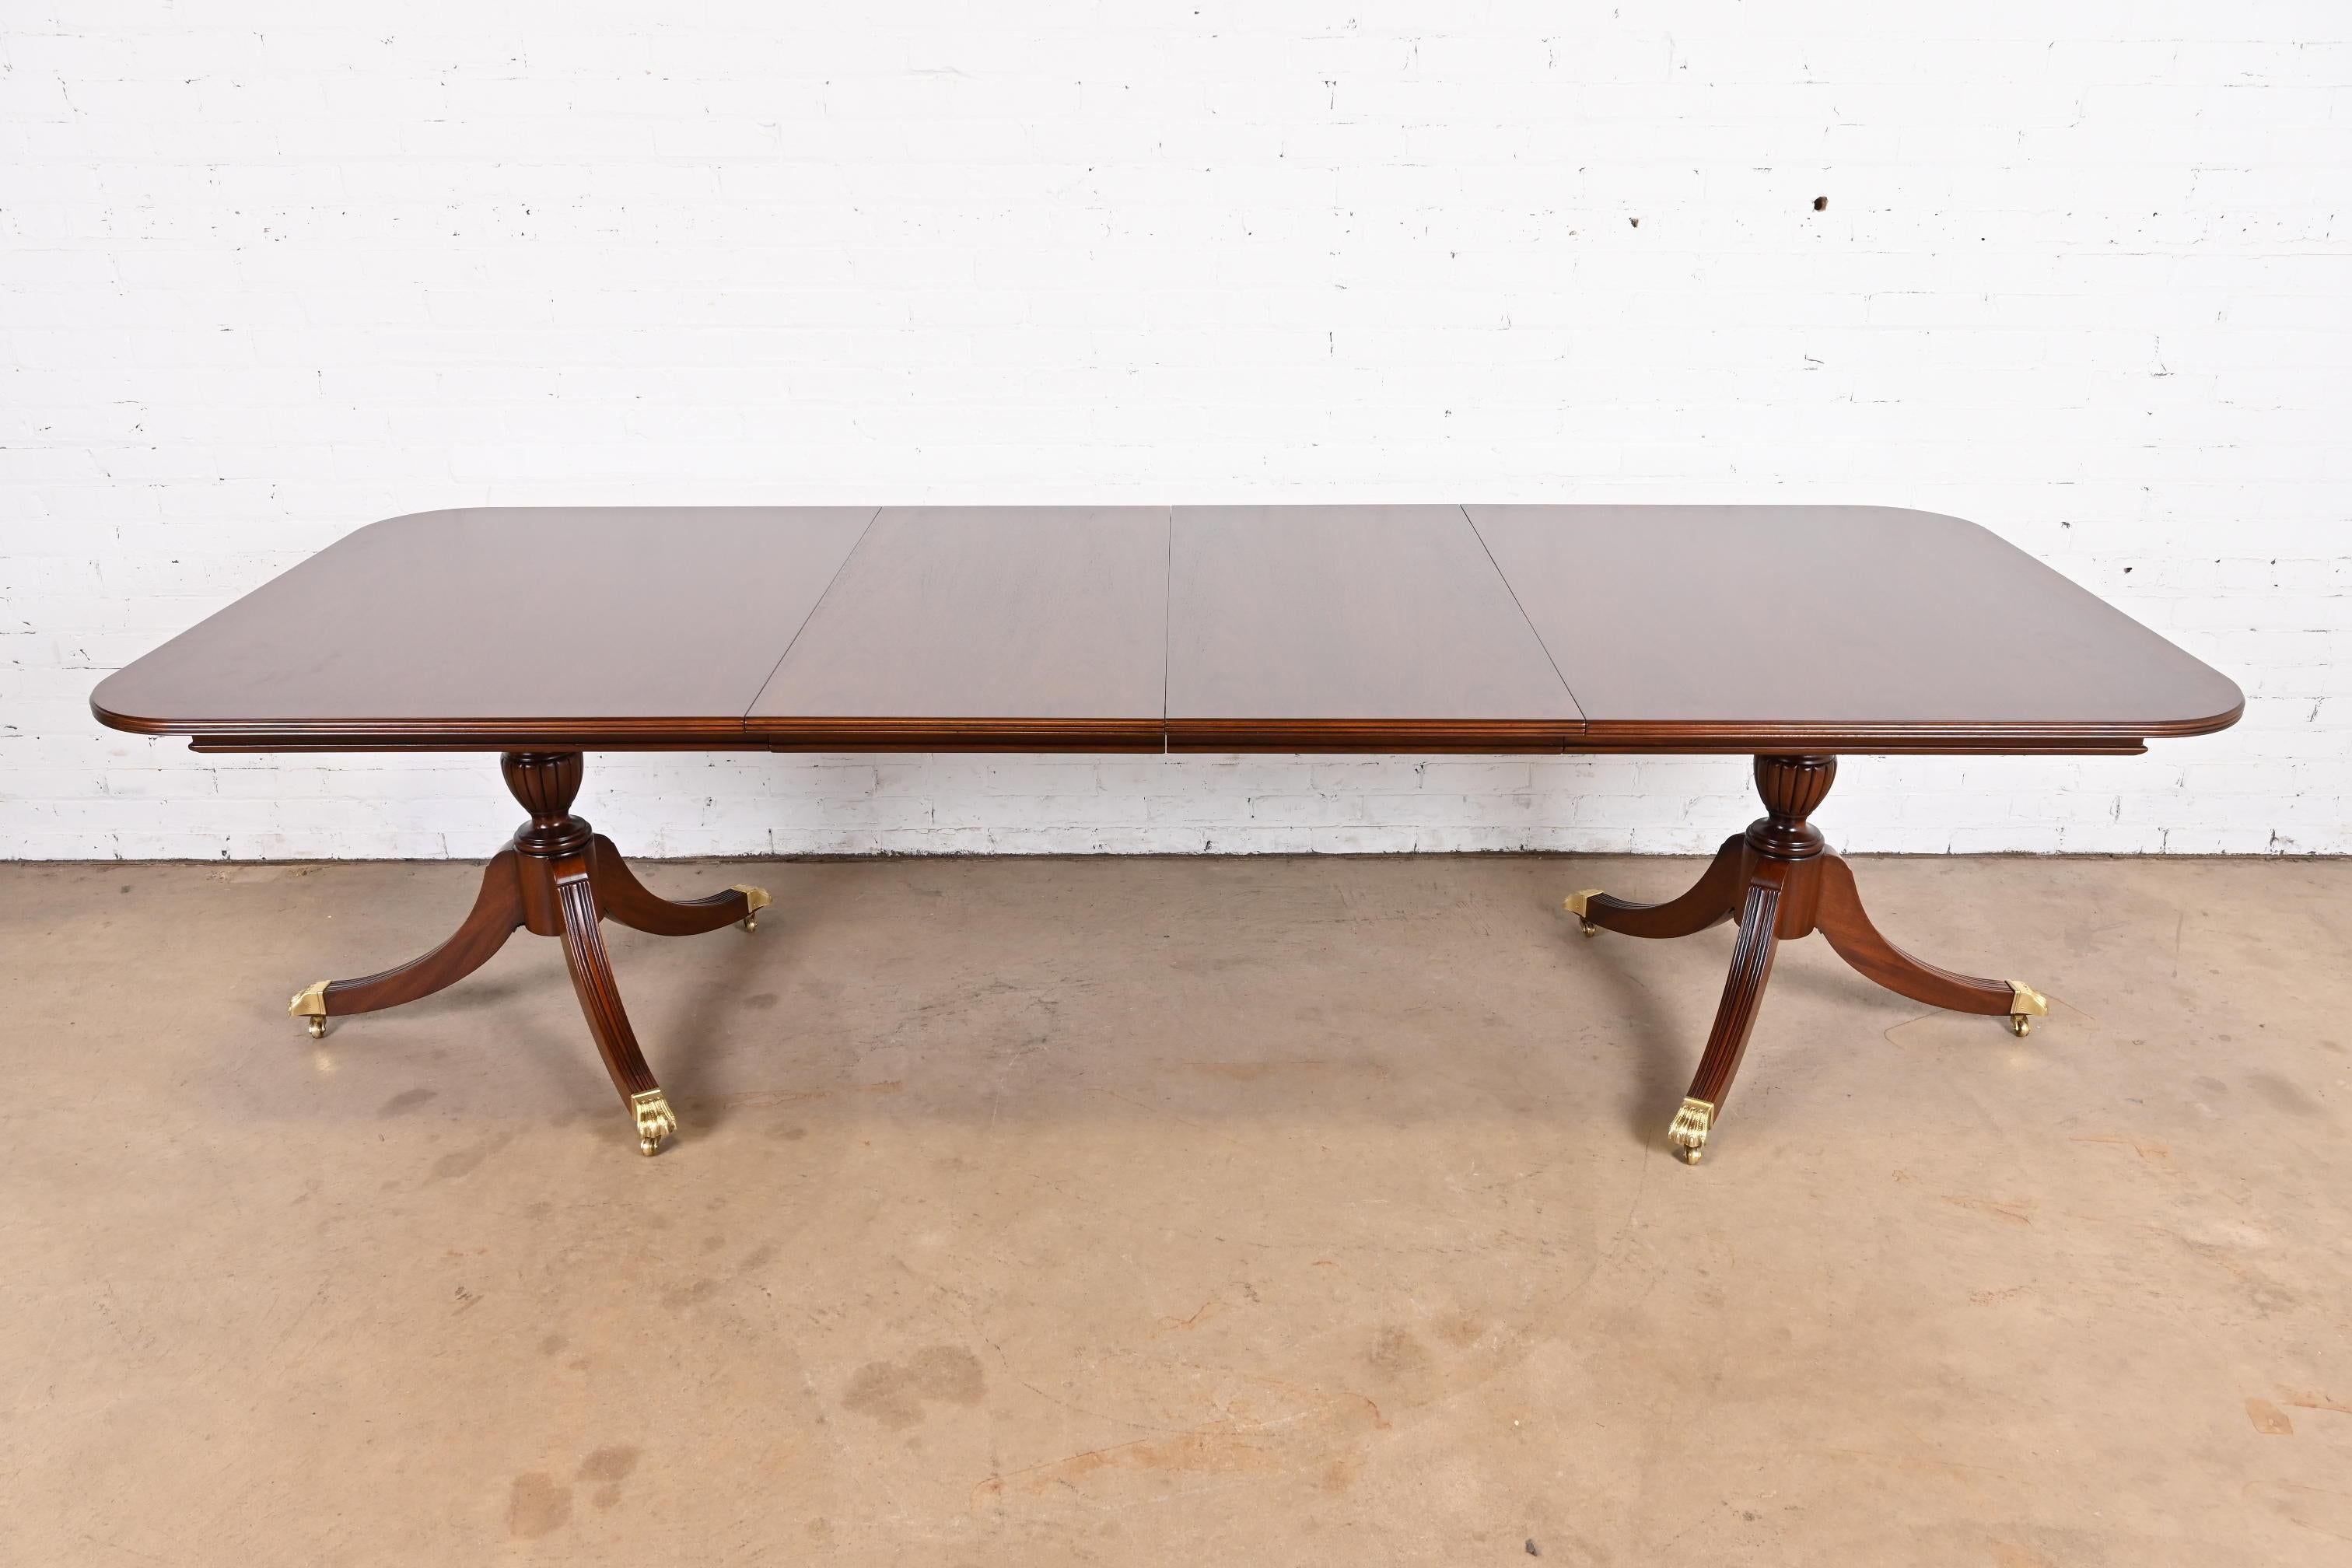 A gorgeous Georgian or Regency style double pedestal extension dining table

In the manner of Baker Furniture

USA, Circa 1980s

Beautiful book-matched banded mahogany, with carved solid mahogany pedestals, and brass-capped paw feet on brass